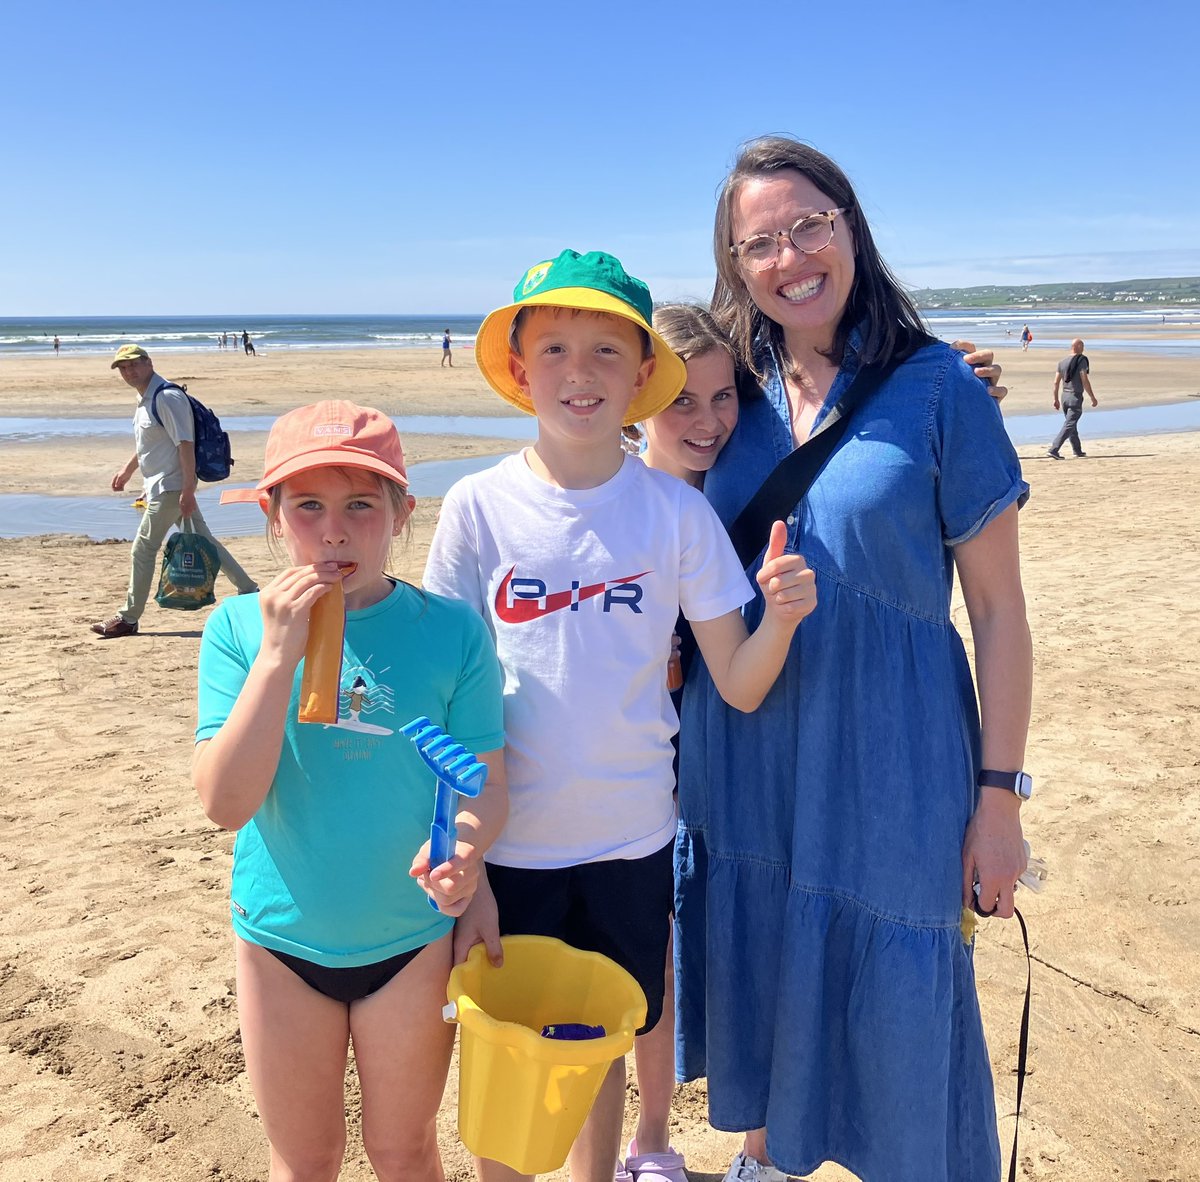 Fun in the sun ☀️ in lovely #Lahinch & “great for the spirits” according to many I spoke to @drivetimerte @RTERadio1